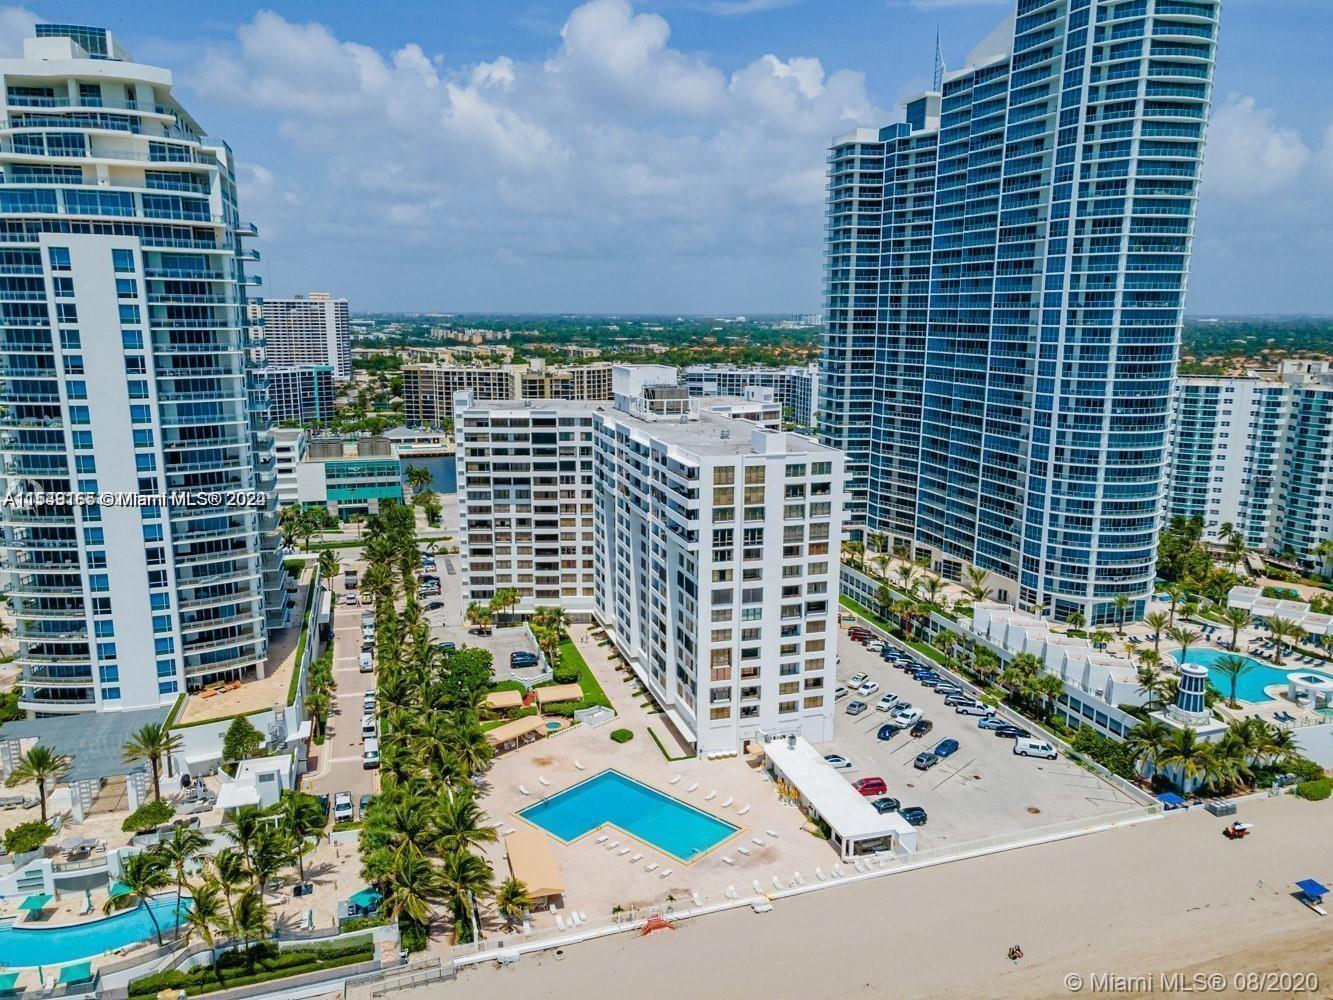 Photo of 3505 S Ocean Dr (Penthouse) #1509 in Hollywood, FL